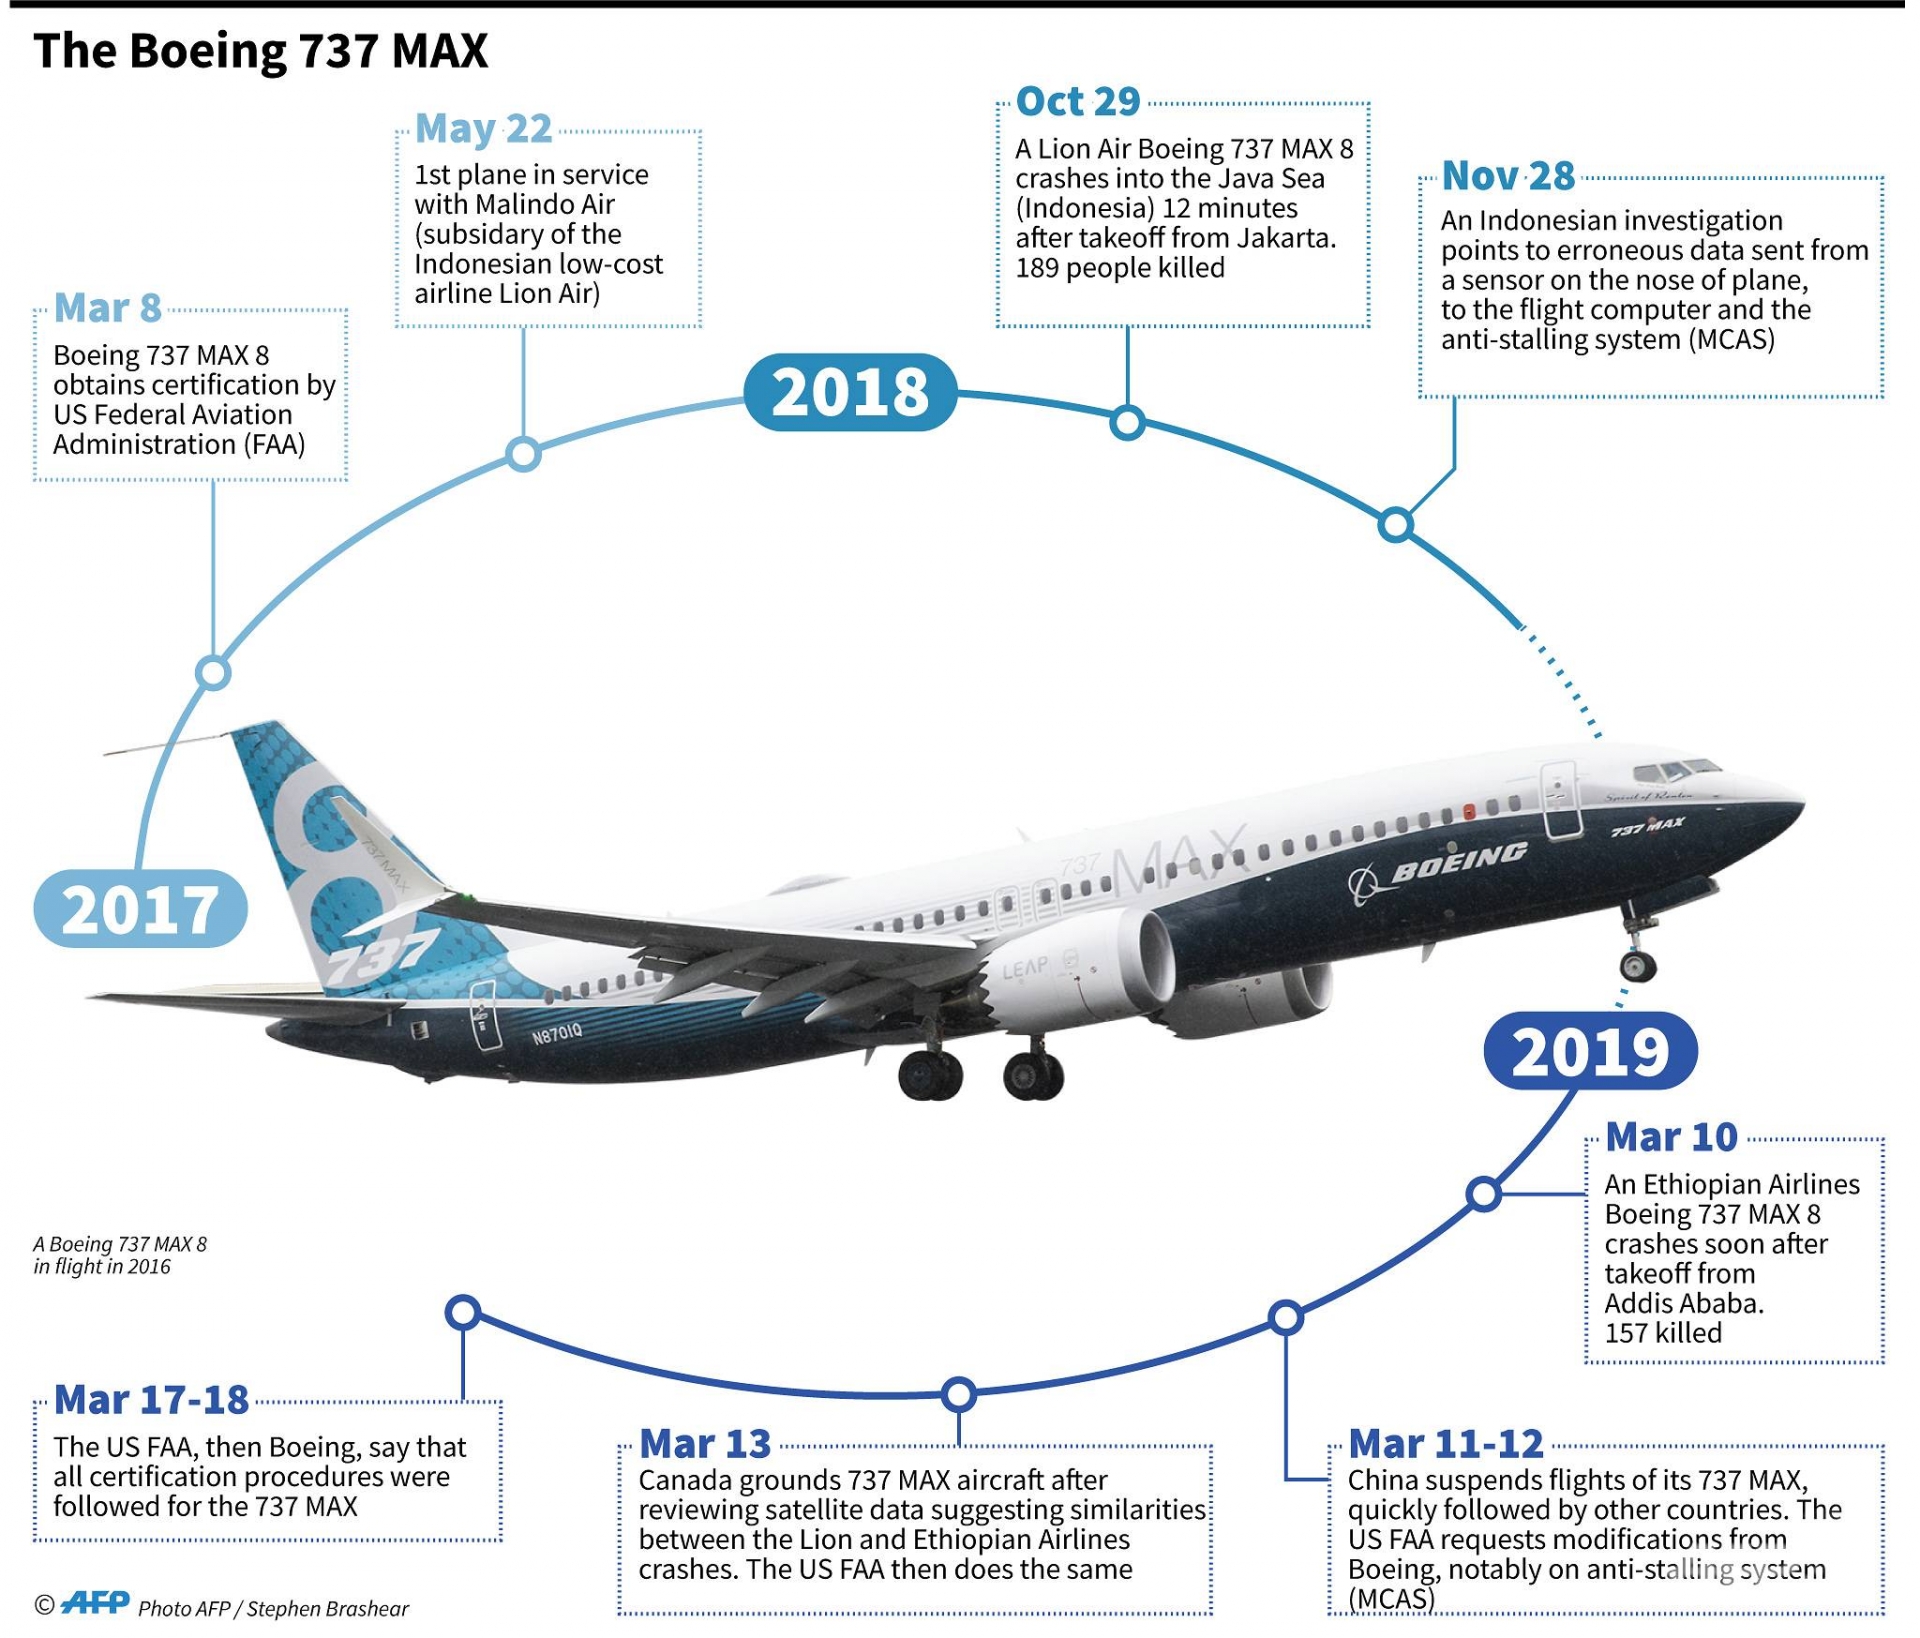 indonesias garuda cancelling 49 boeing 737 max 8 plane orders after crashes